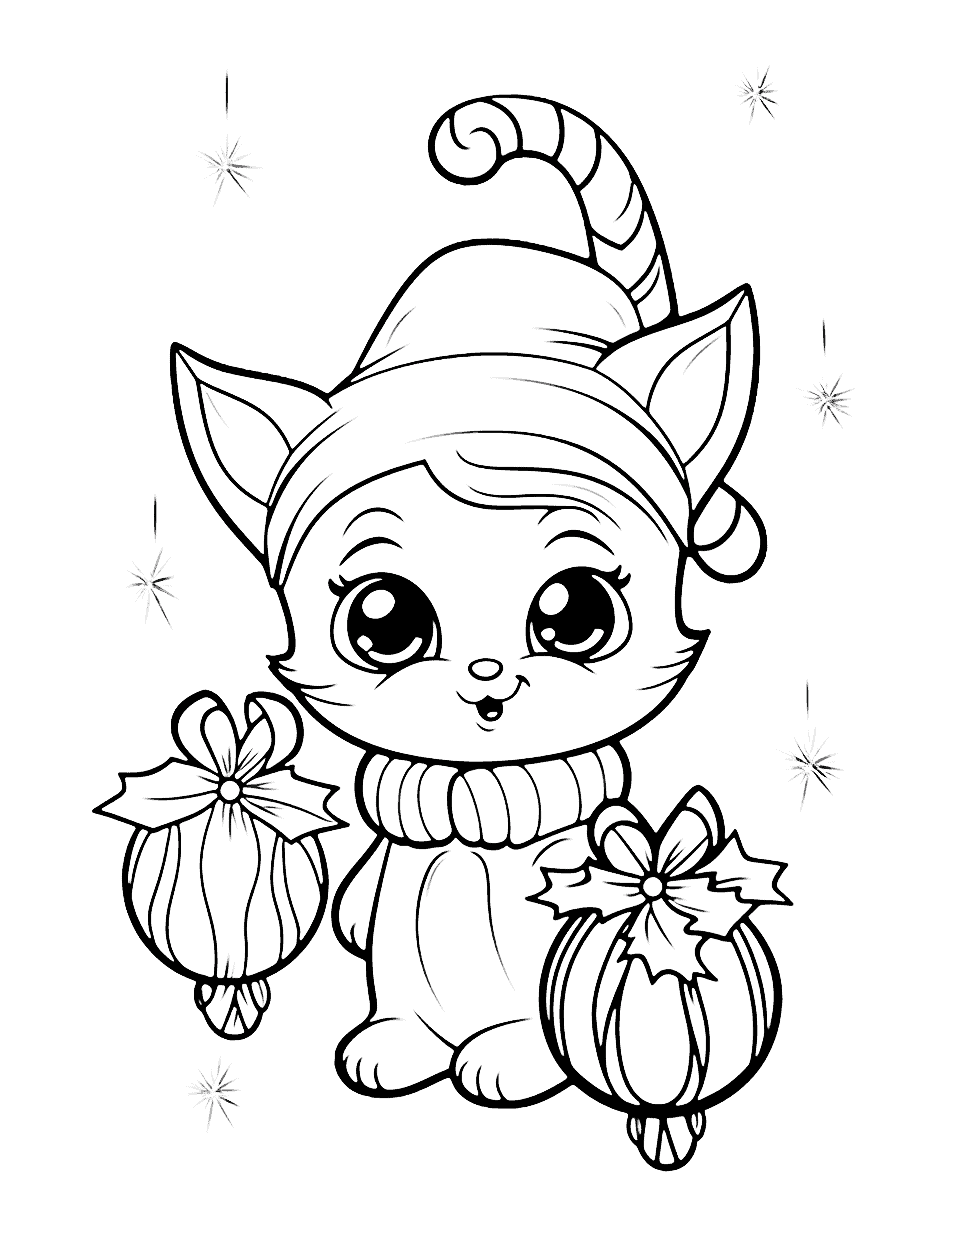 Cute Christmas Kitten Coloring Page - A cute kitten playing with Christmas ornaments.